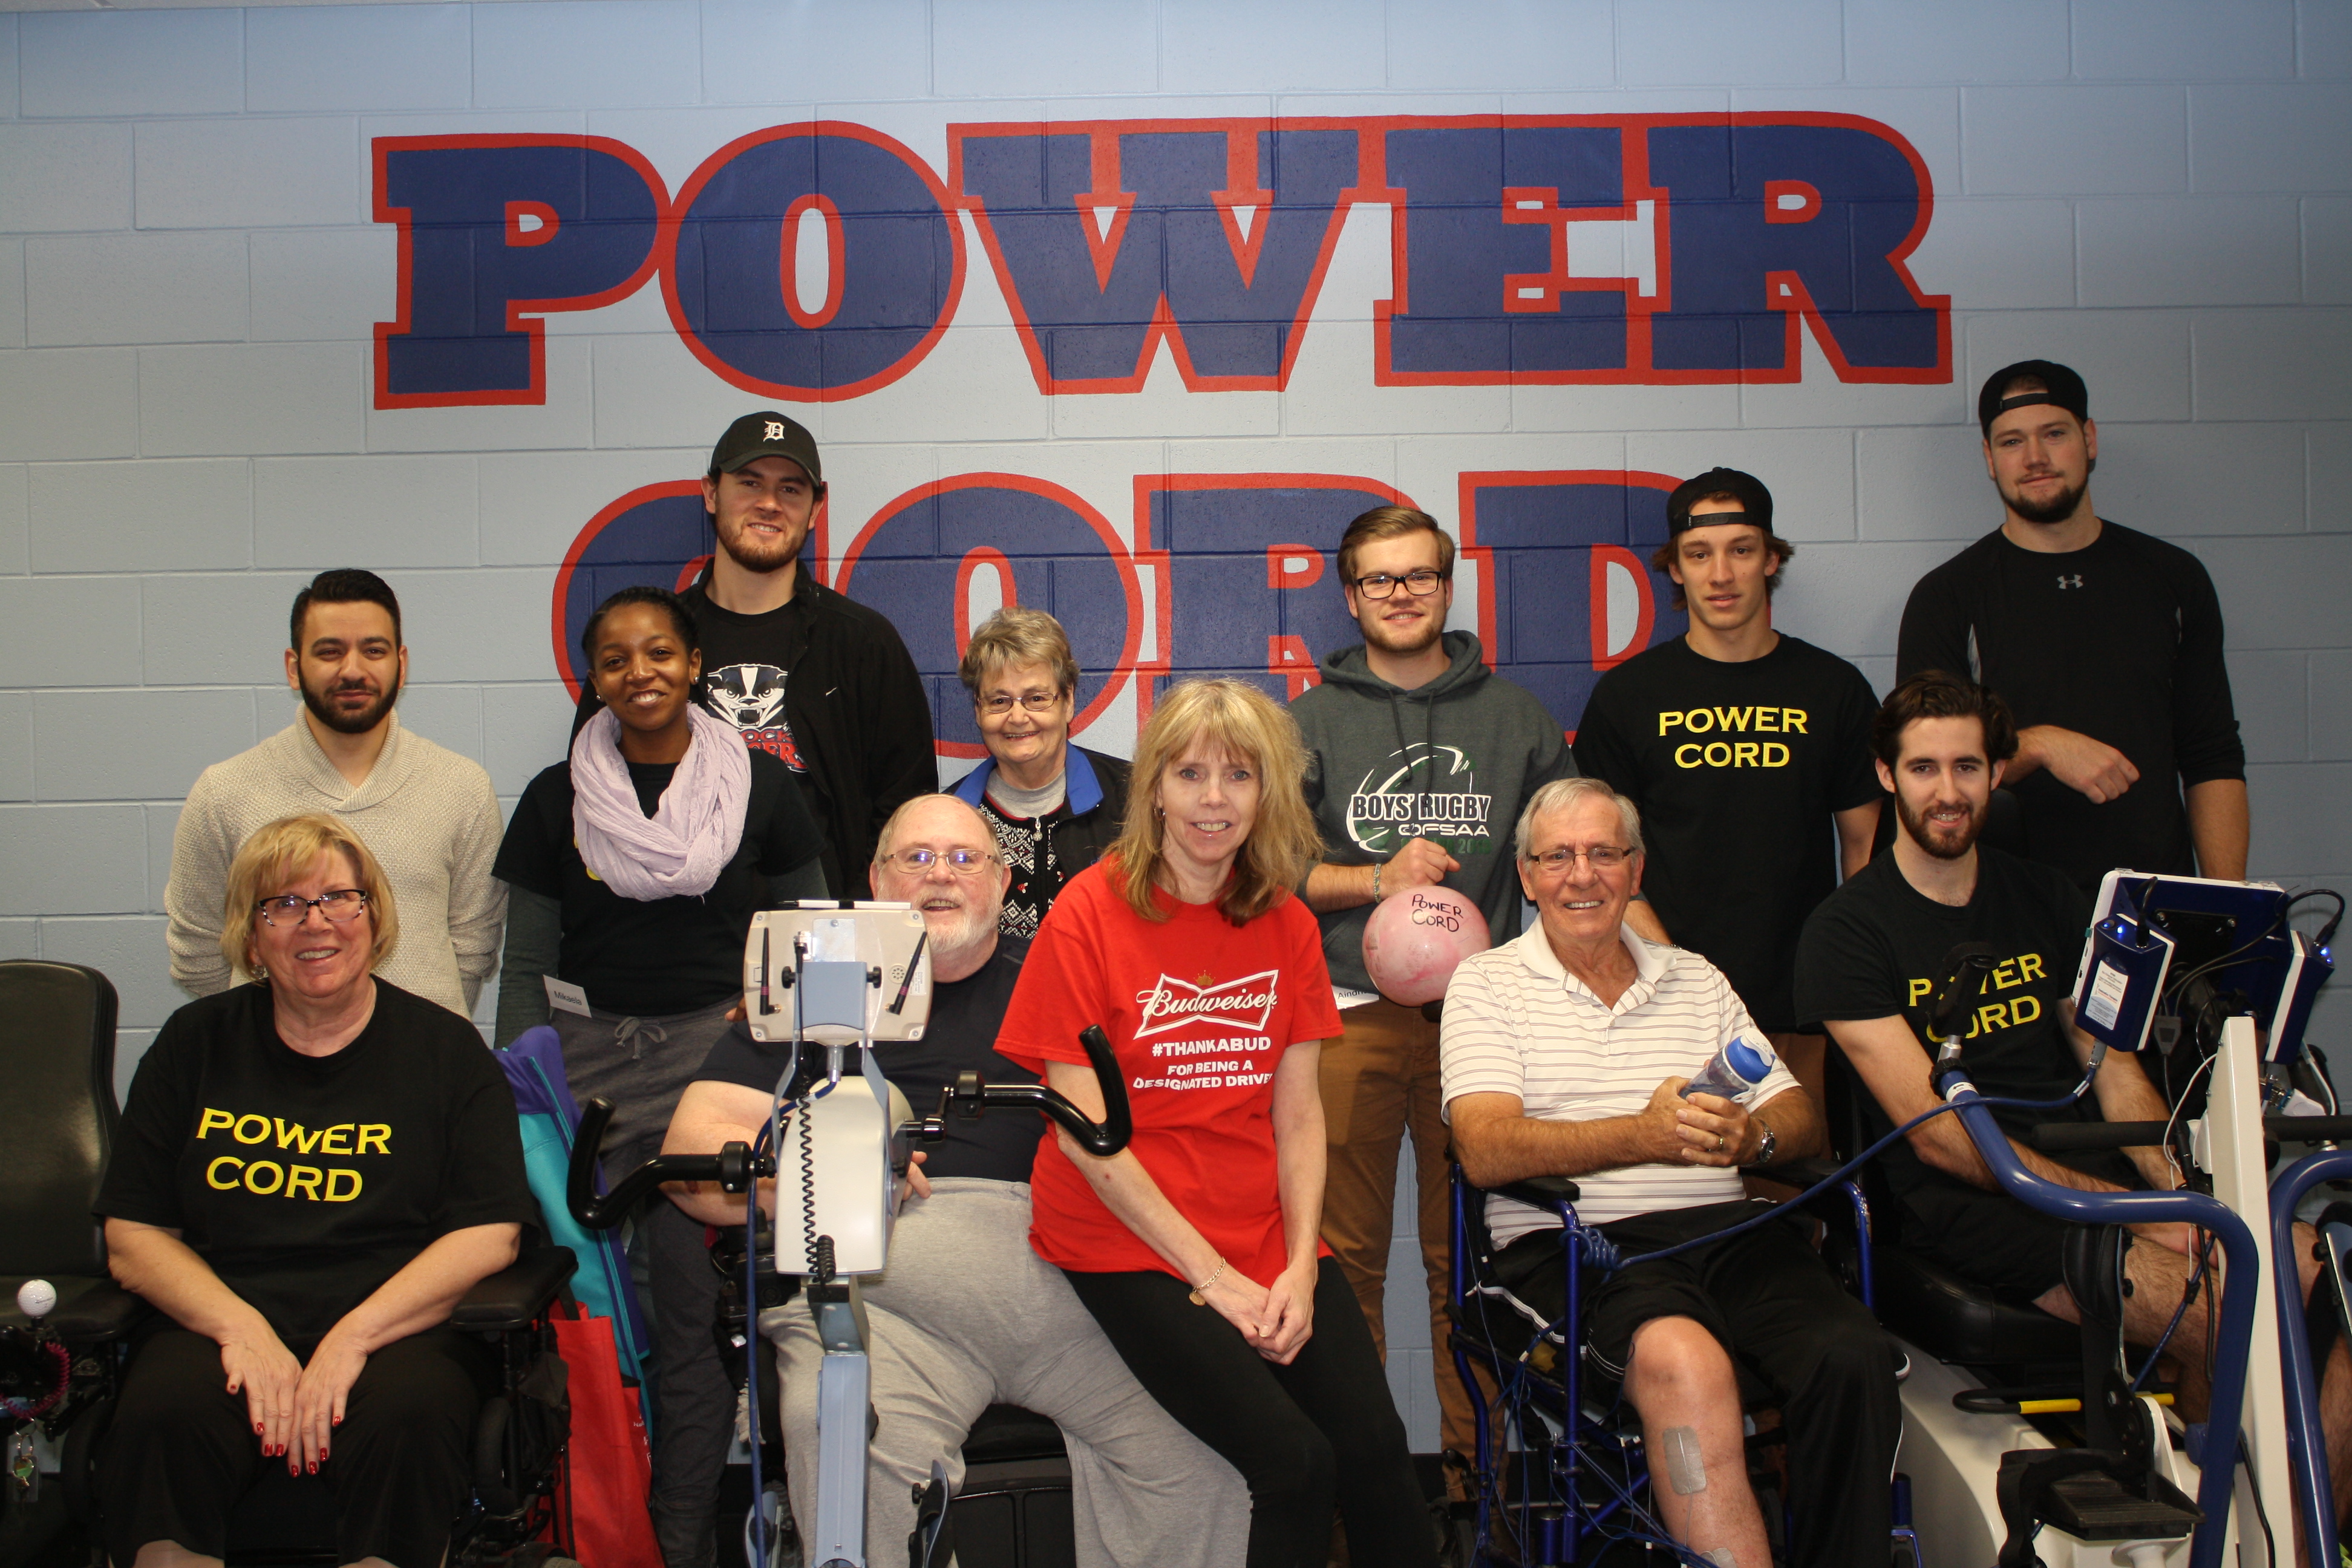 Power Cord members are improving their health and seeing results